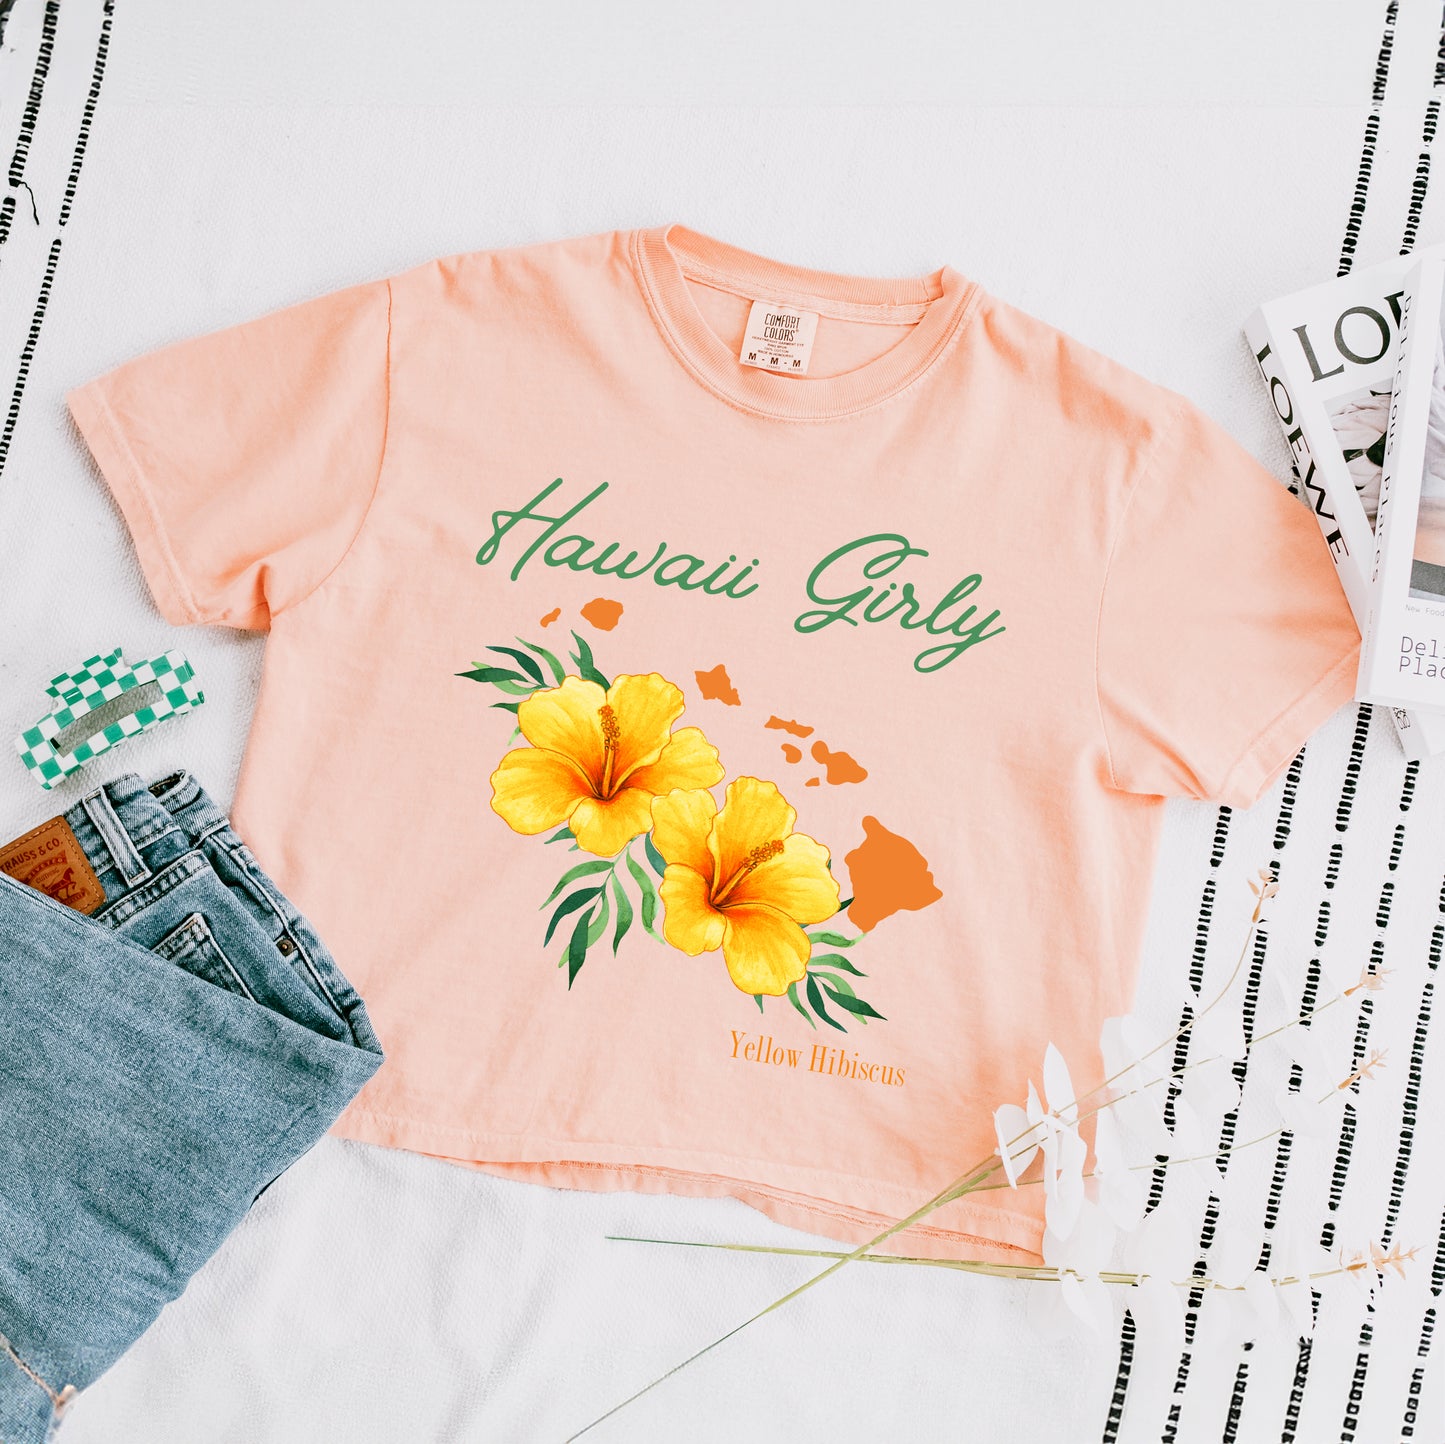 Hawaii Girly Flower | Relaxed Fit Cropped Tee